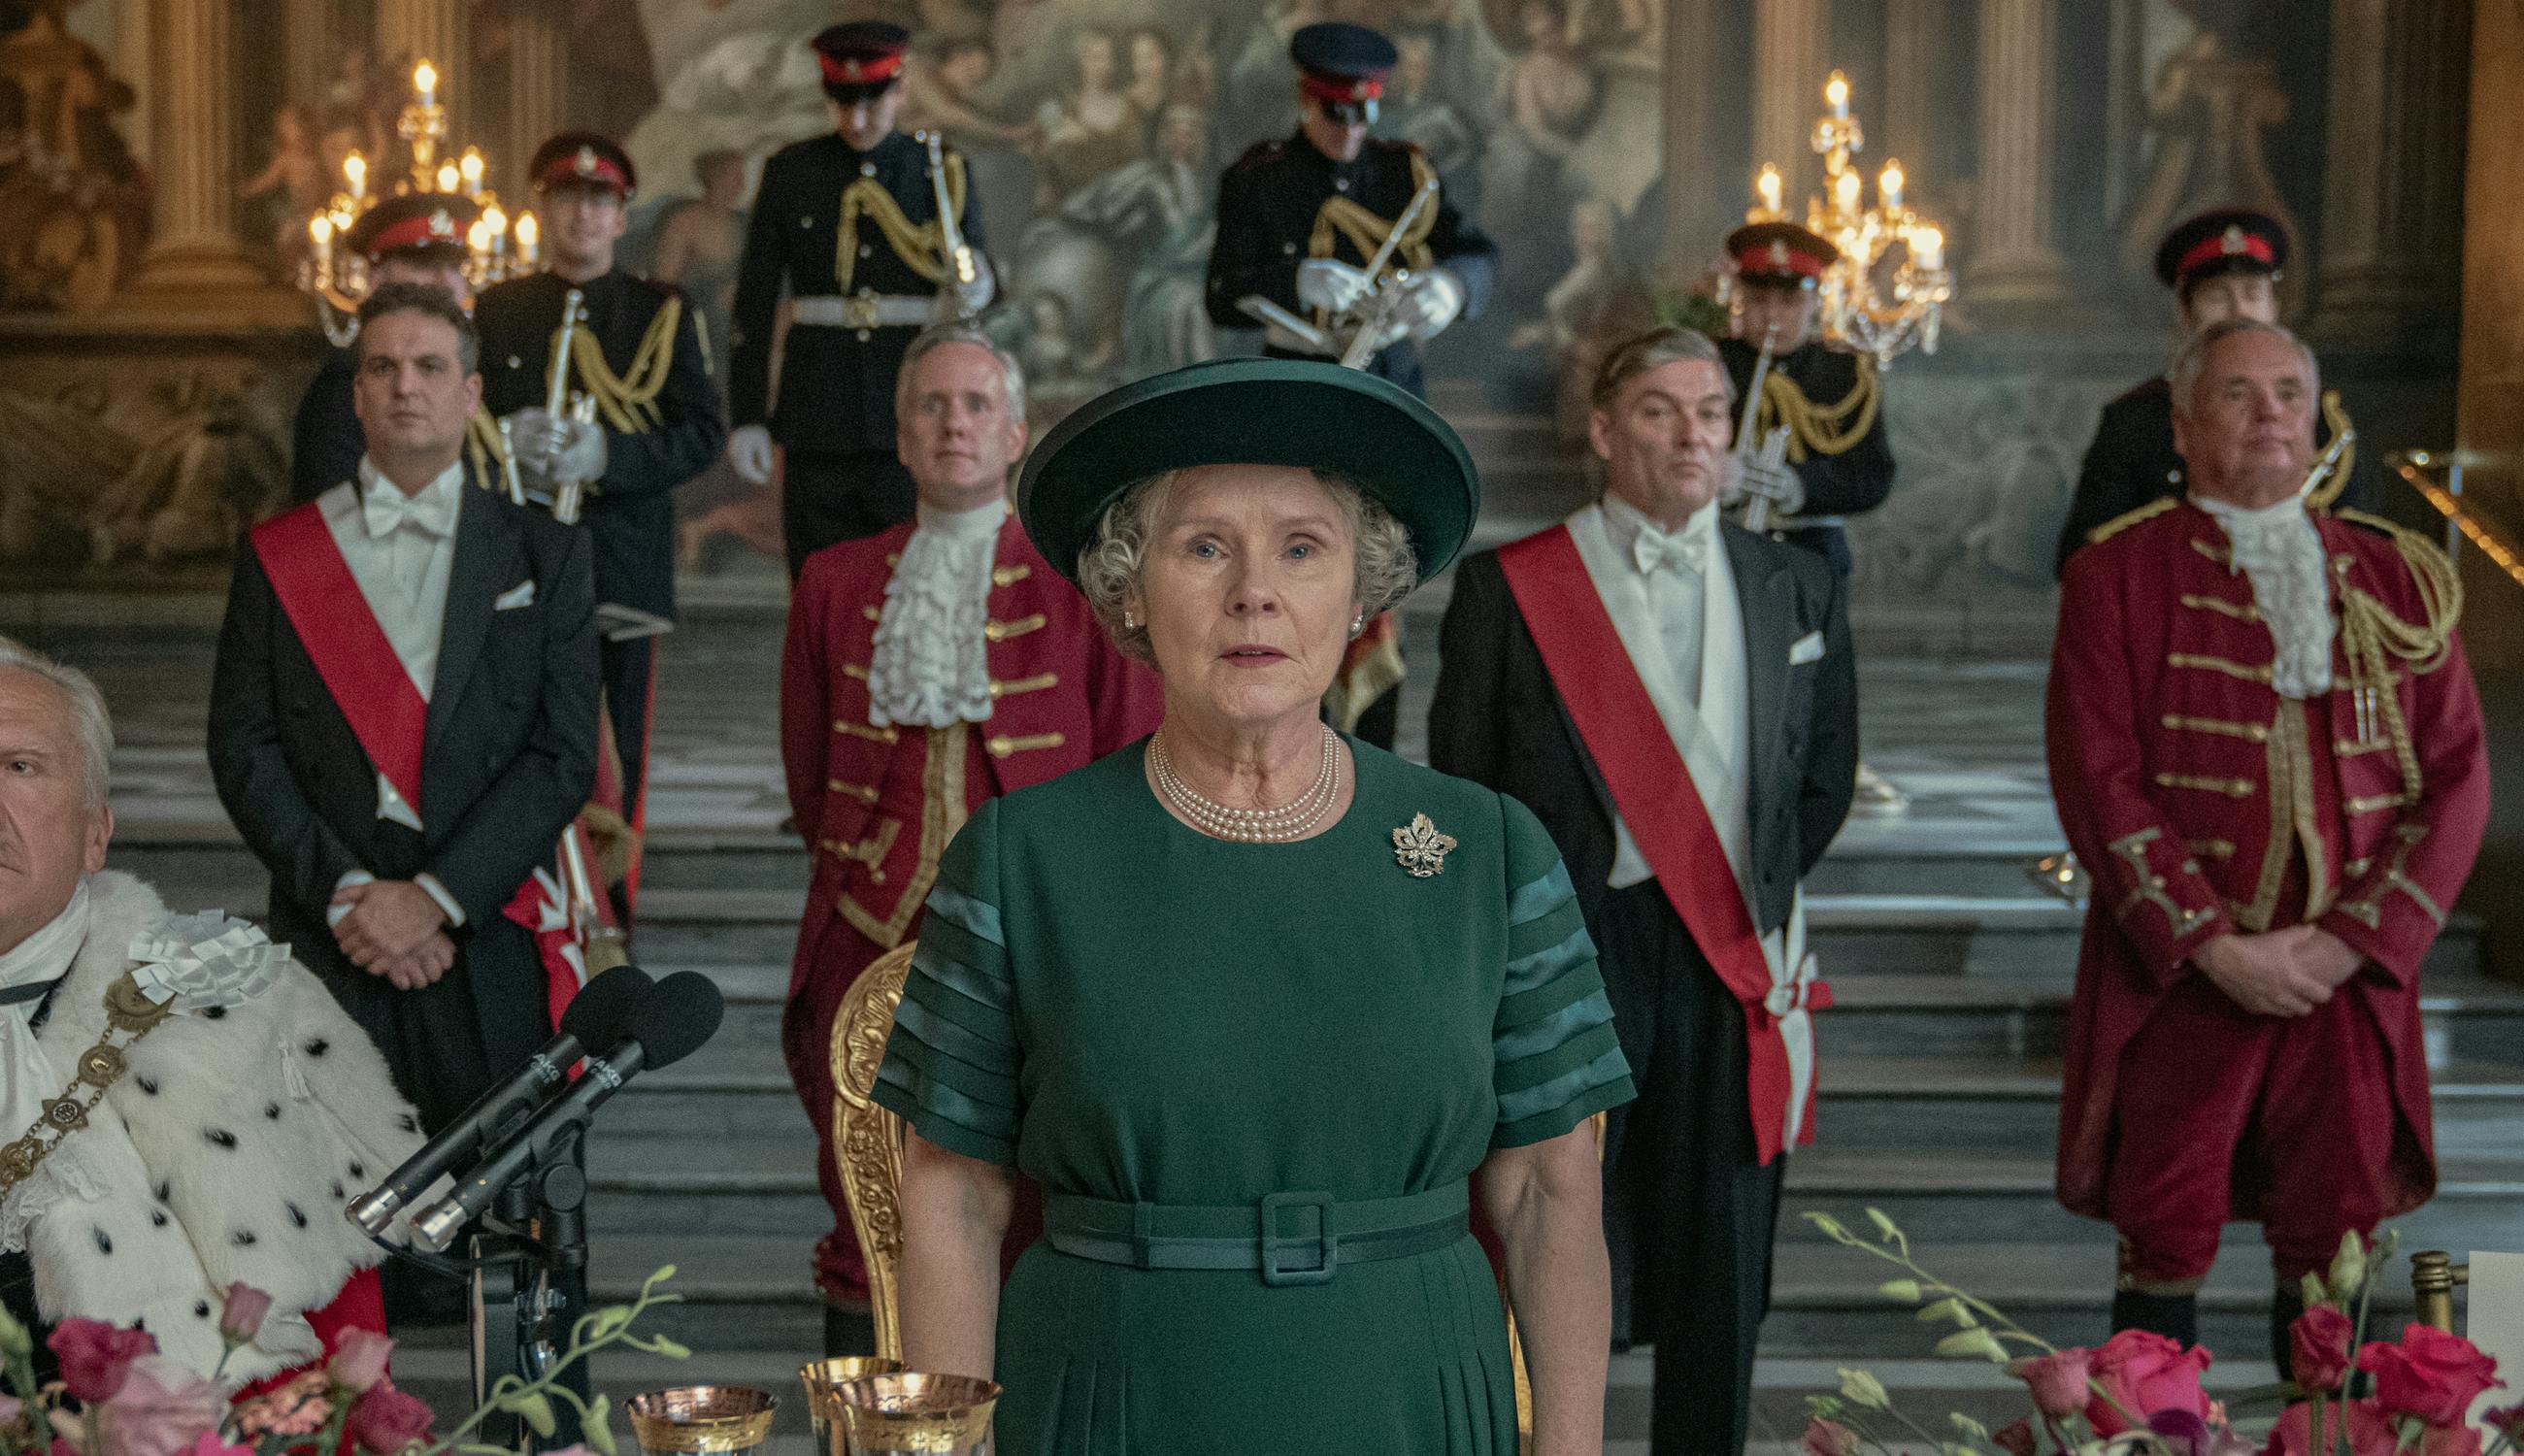 Queen Elizabeth (Imelda Staunton) wears green and stands in front of some guards wearing white, black, and red.